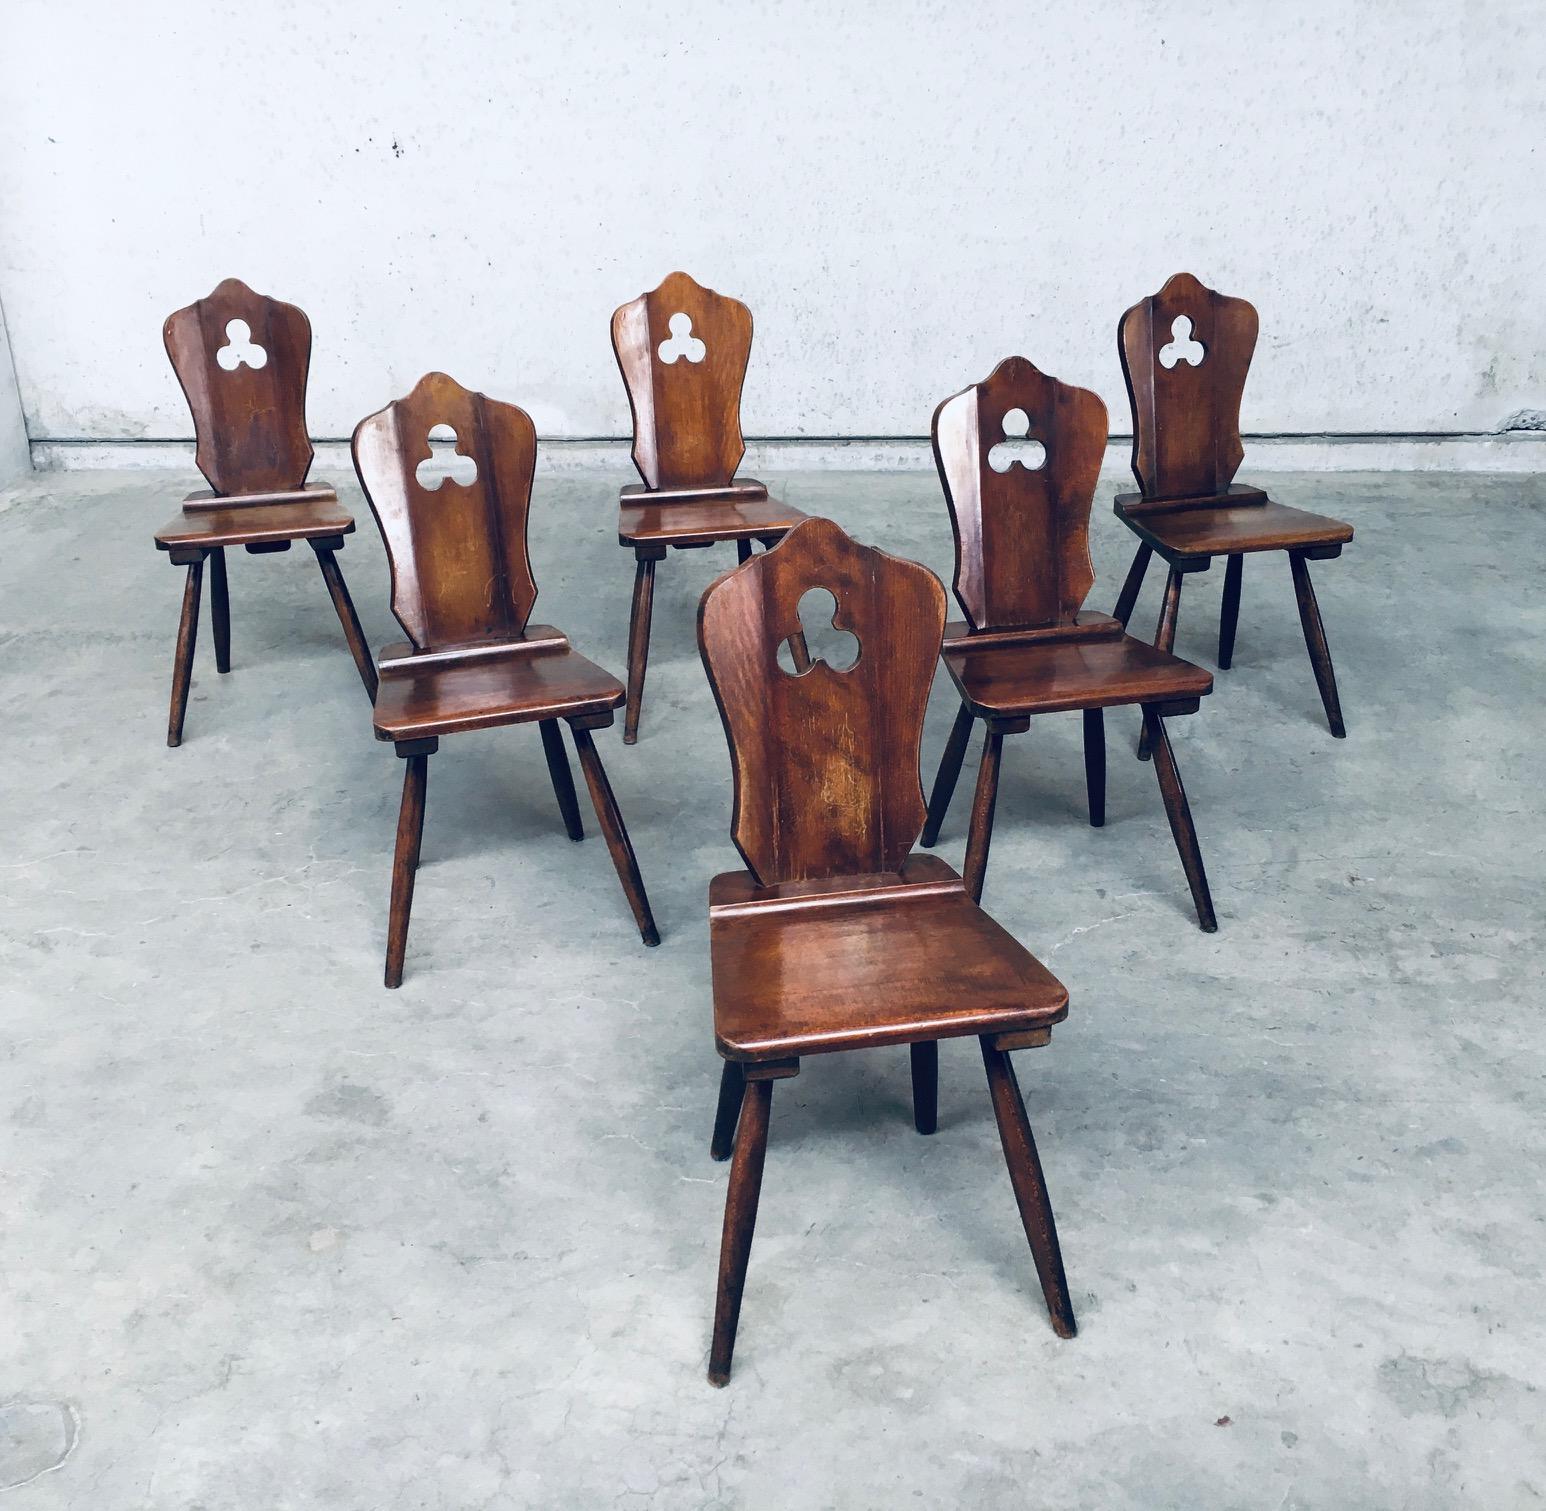 Vintage mid-century Brutalist Rustic design dining chair set of 6 by Lux-Wood, made in Belgium 1960's. Made by N.V. Usines Jean Huygens S.A. Mechelen, Belgium. They have a label, see picture. Heavy Oak Wood constructed chairs with clover cut in the